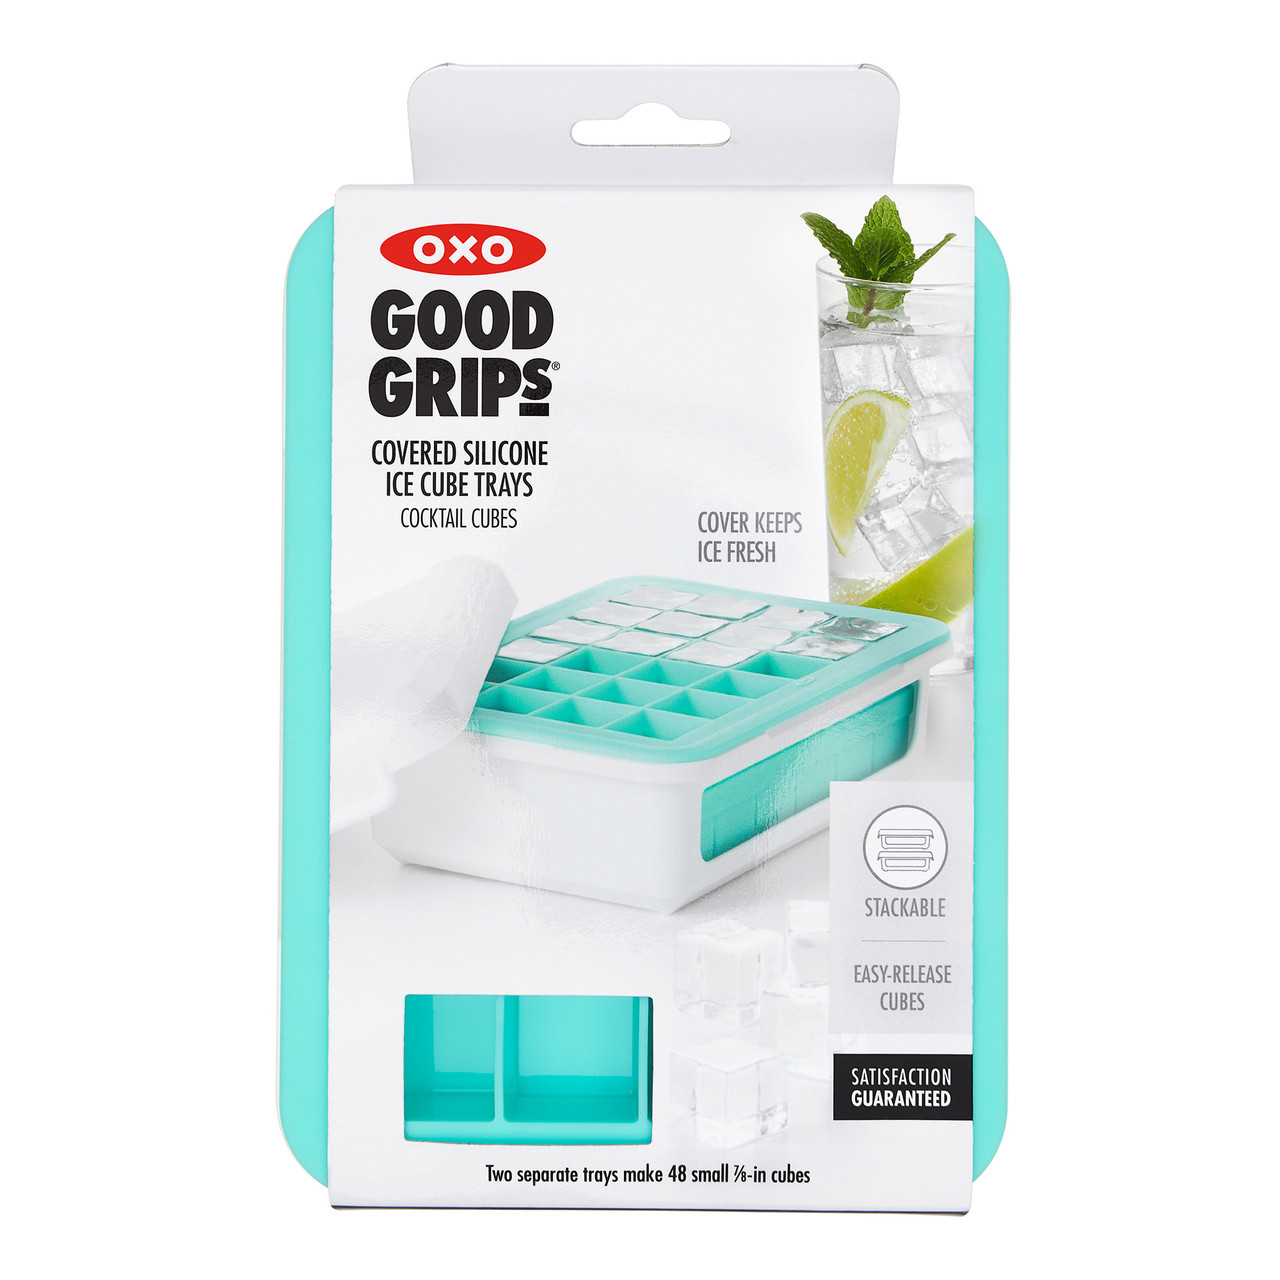 Good Grips Covered Ice Cube Tray - Large Cubes, OXO